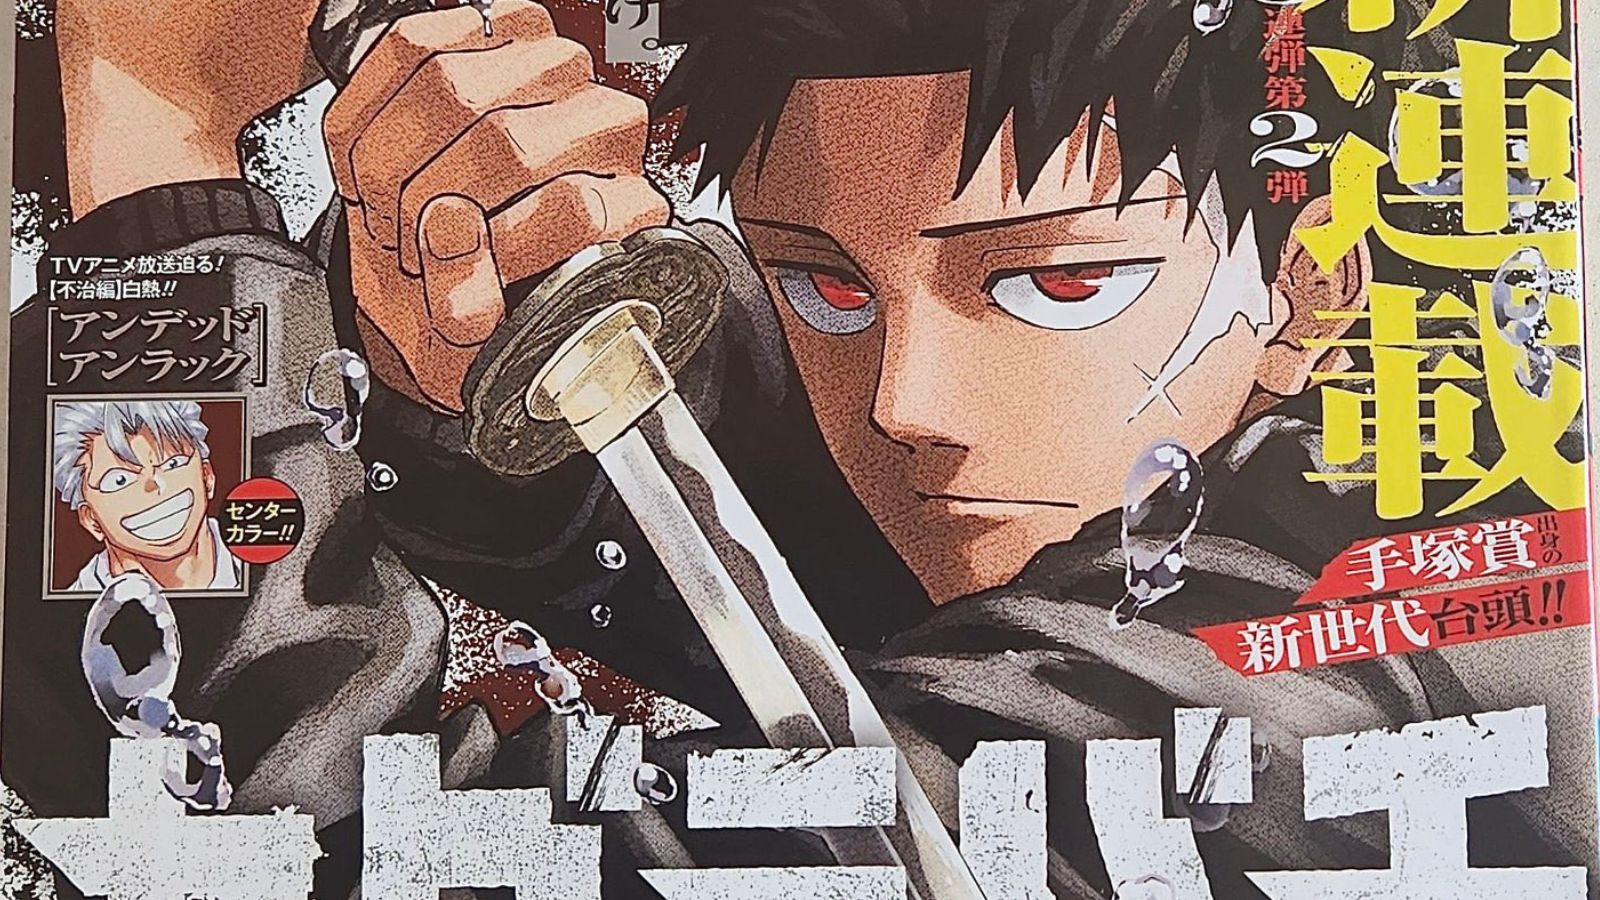 Black Clover Manga leaves Weekly Shonen Jump - everything you need to know